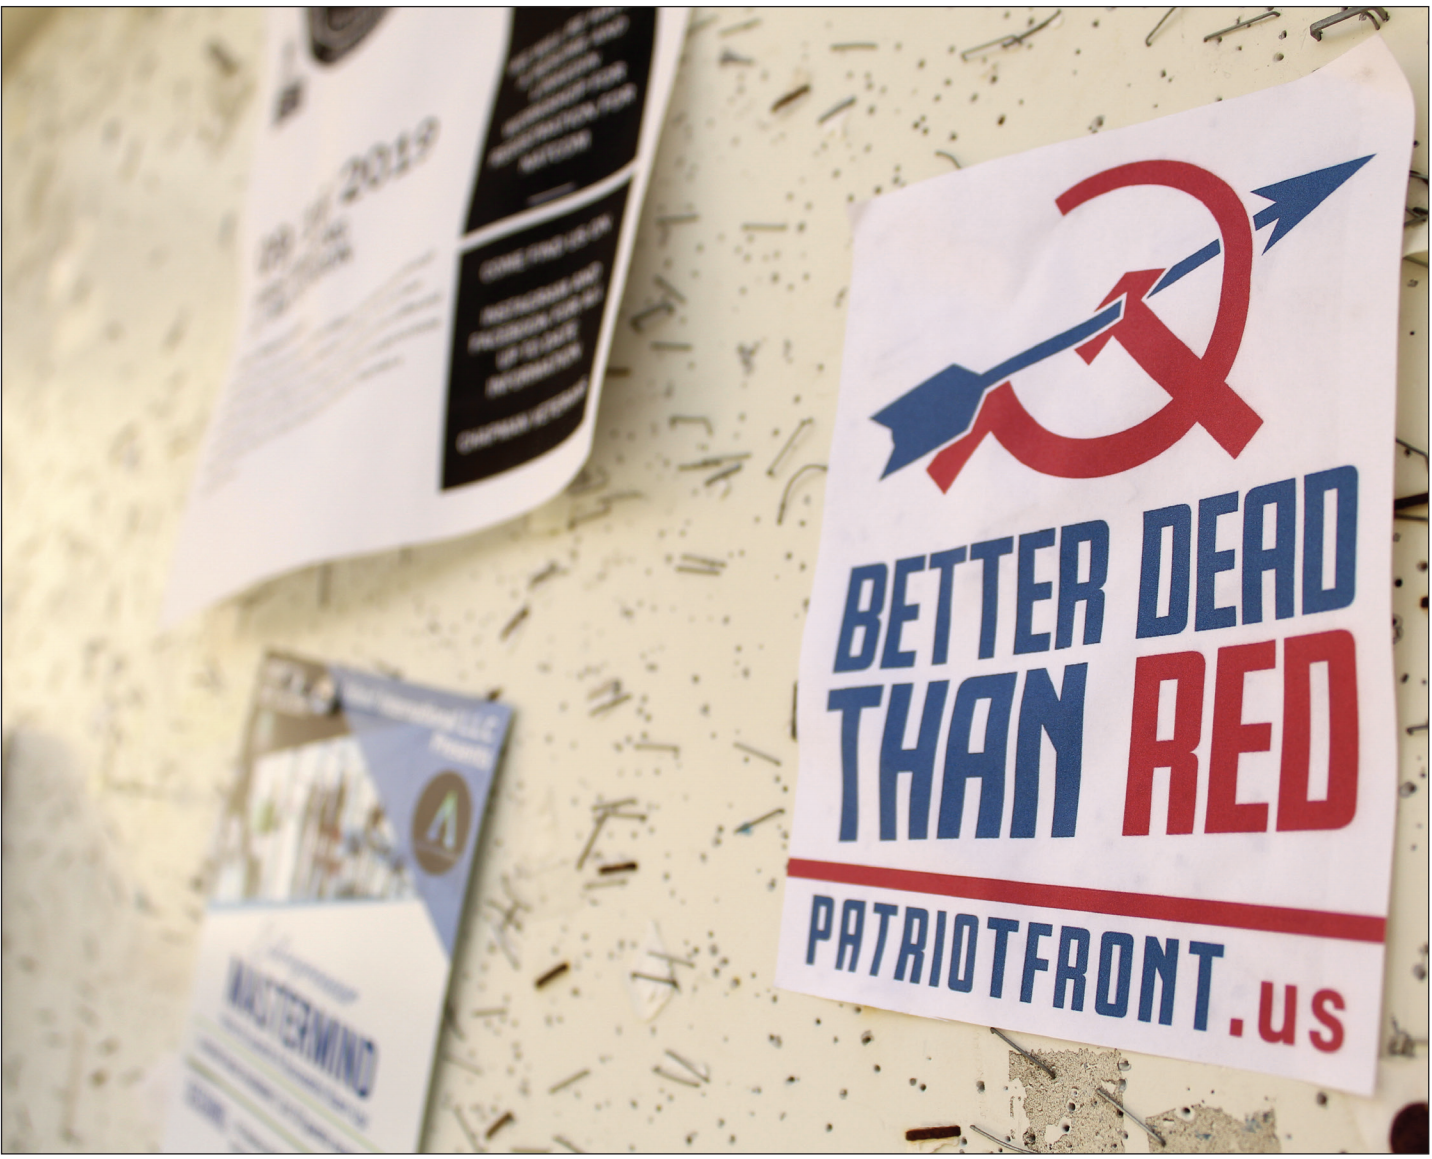 Patriot Front flyers which targeted the Chapman community in 2019, reappeared at the start of the Fall 2020 semester. Photo courtesy of Panther News photo editor Kali Hoffman.